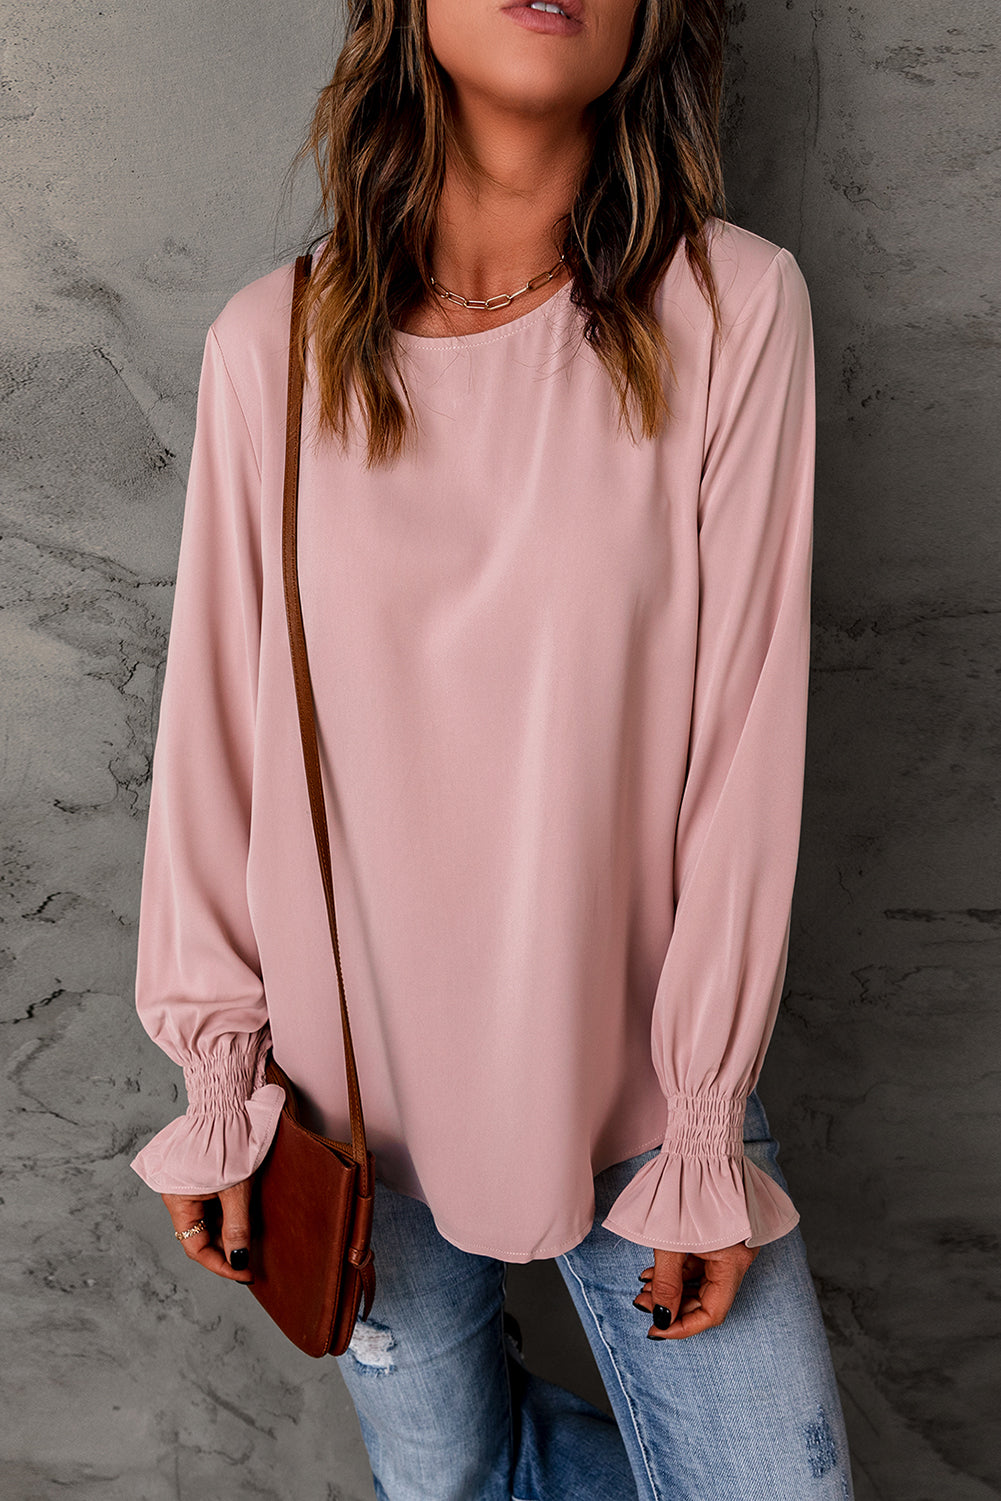 Blouse Rose Manches Bouffantes Femme Chic